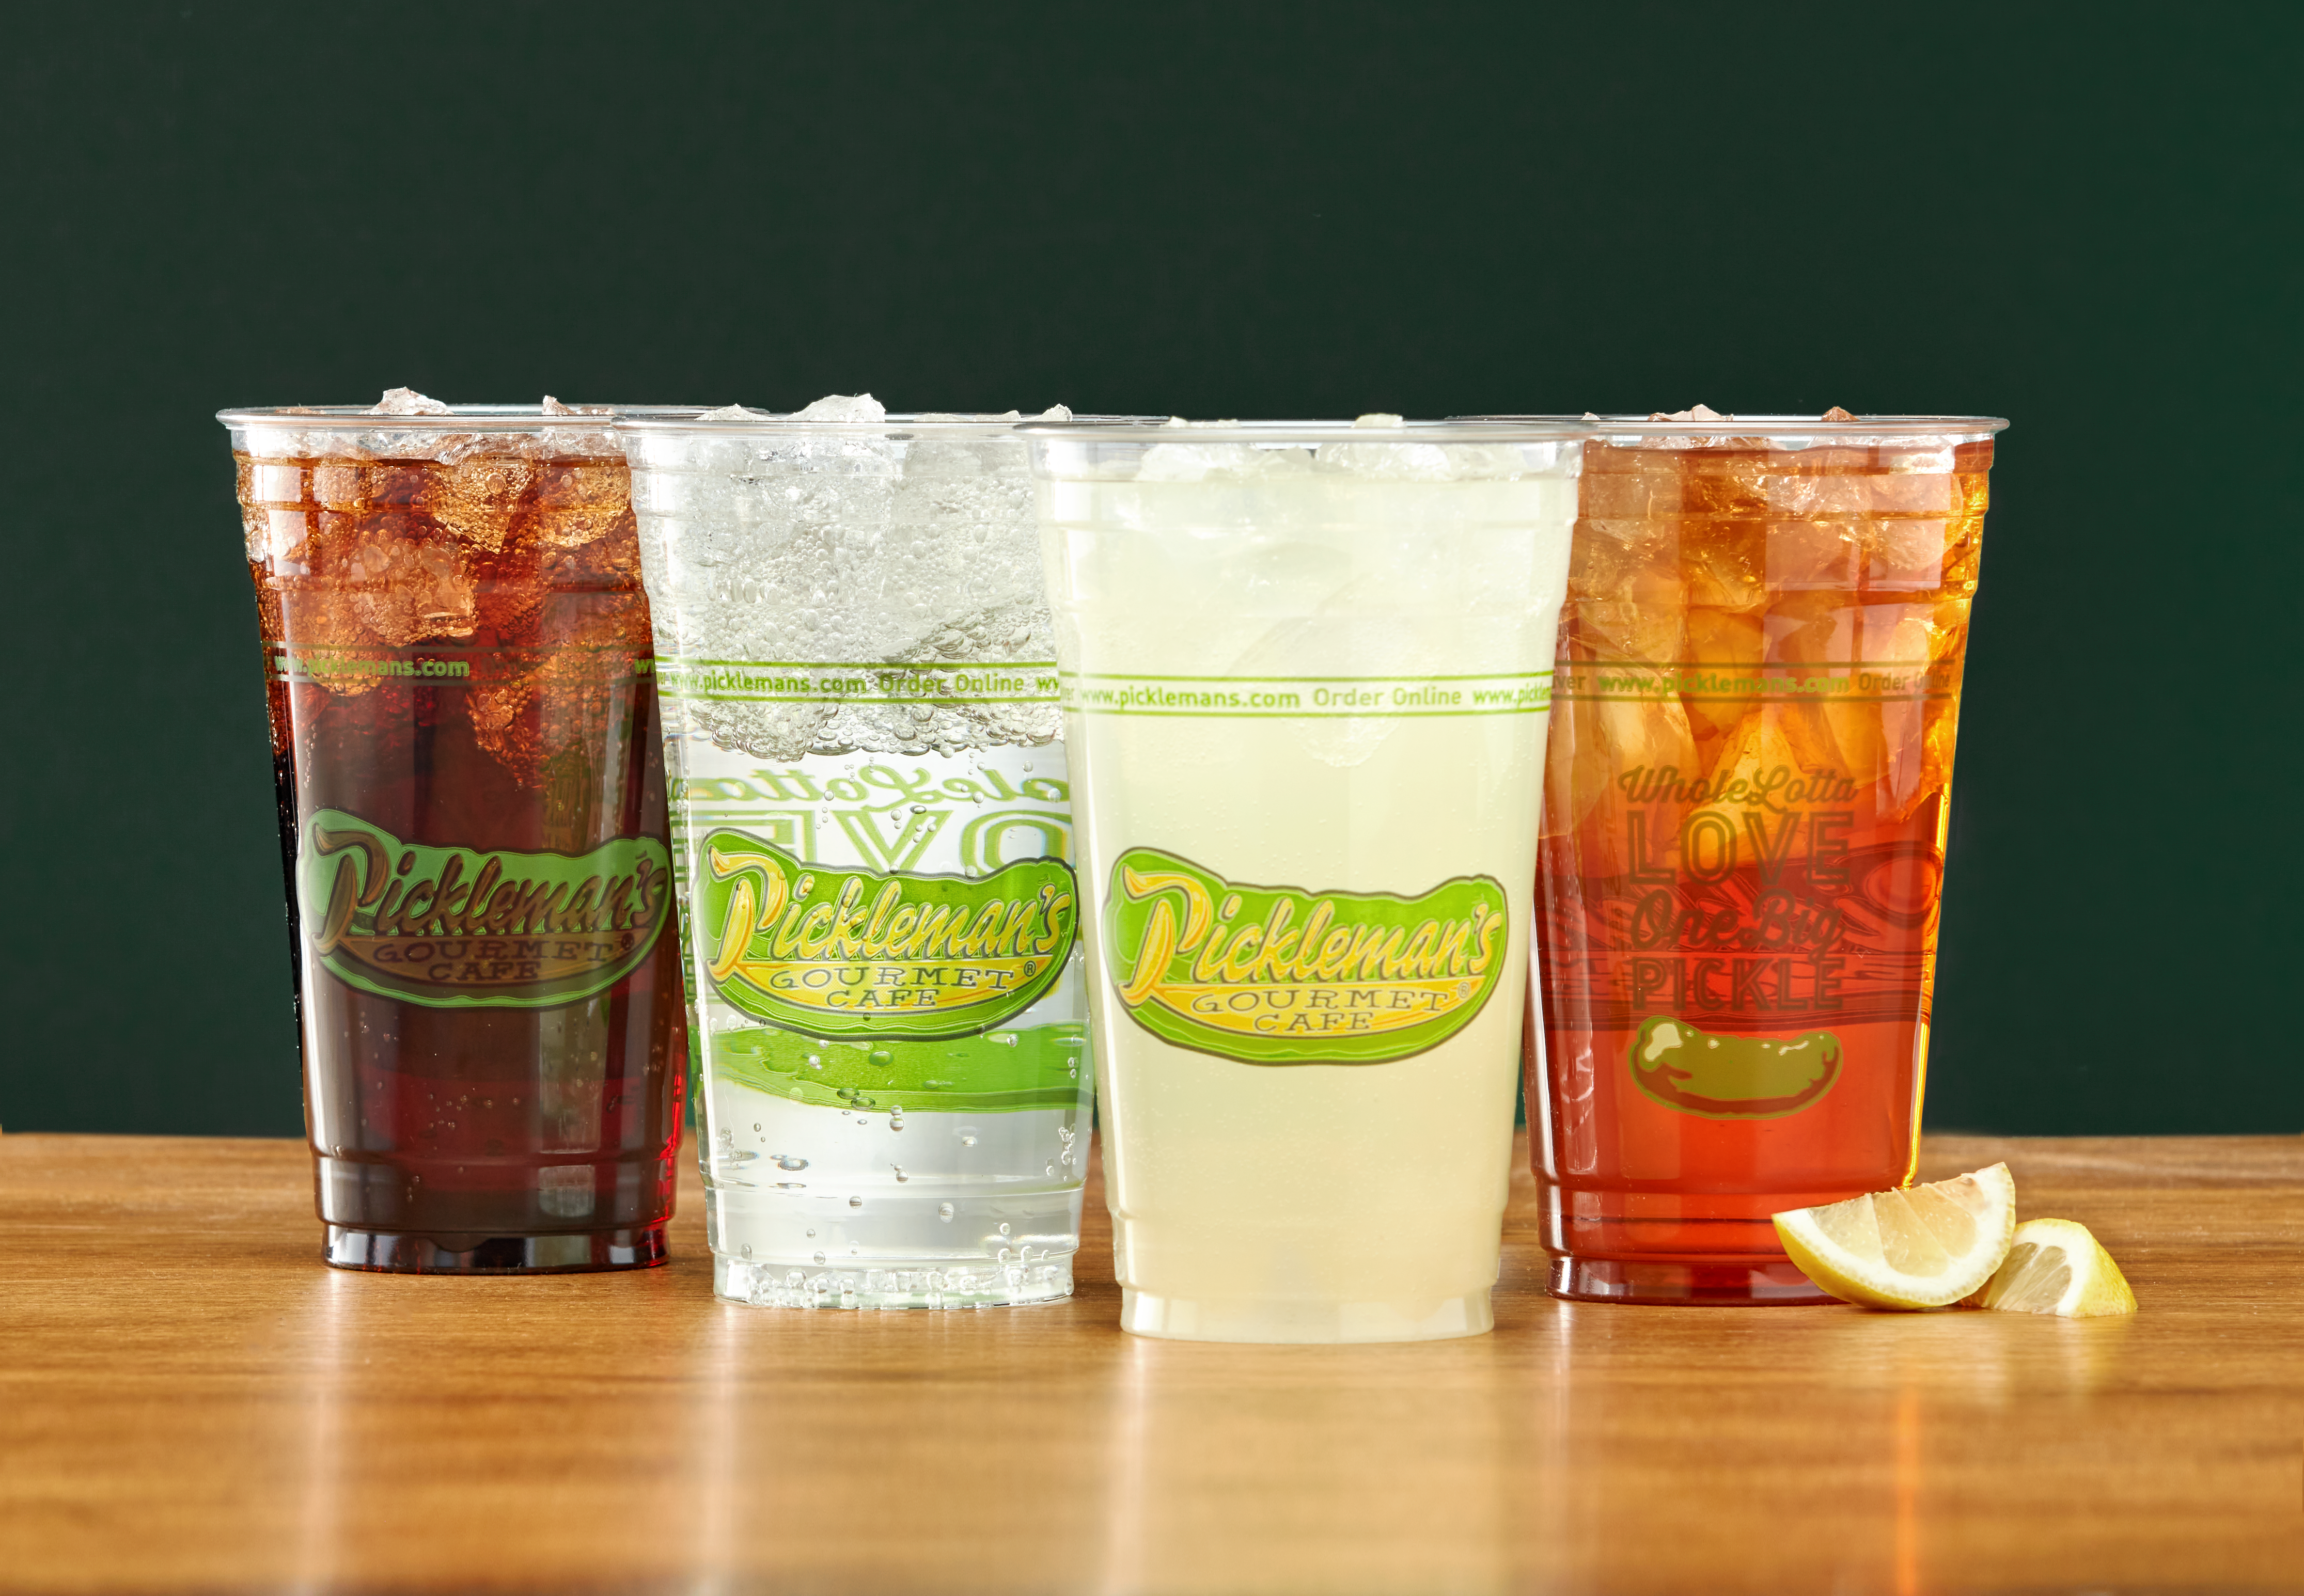 Pickleman’s Gourmet Cafe Unveils New Beverages from Oregon & Rishi